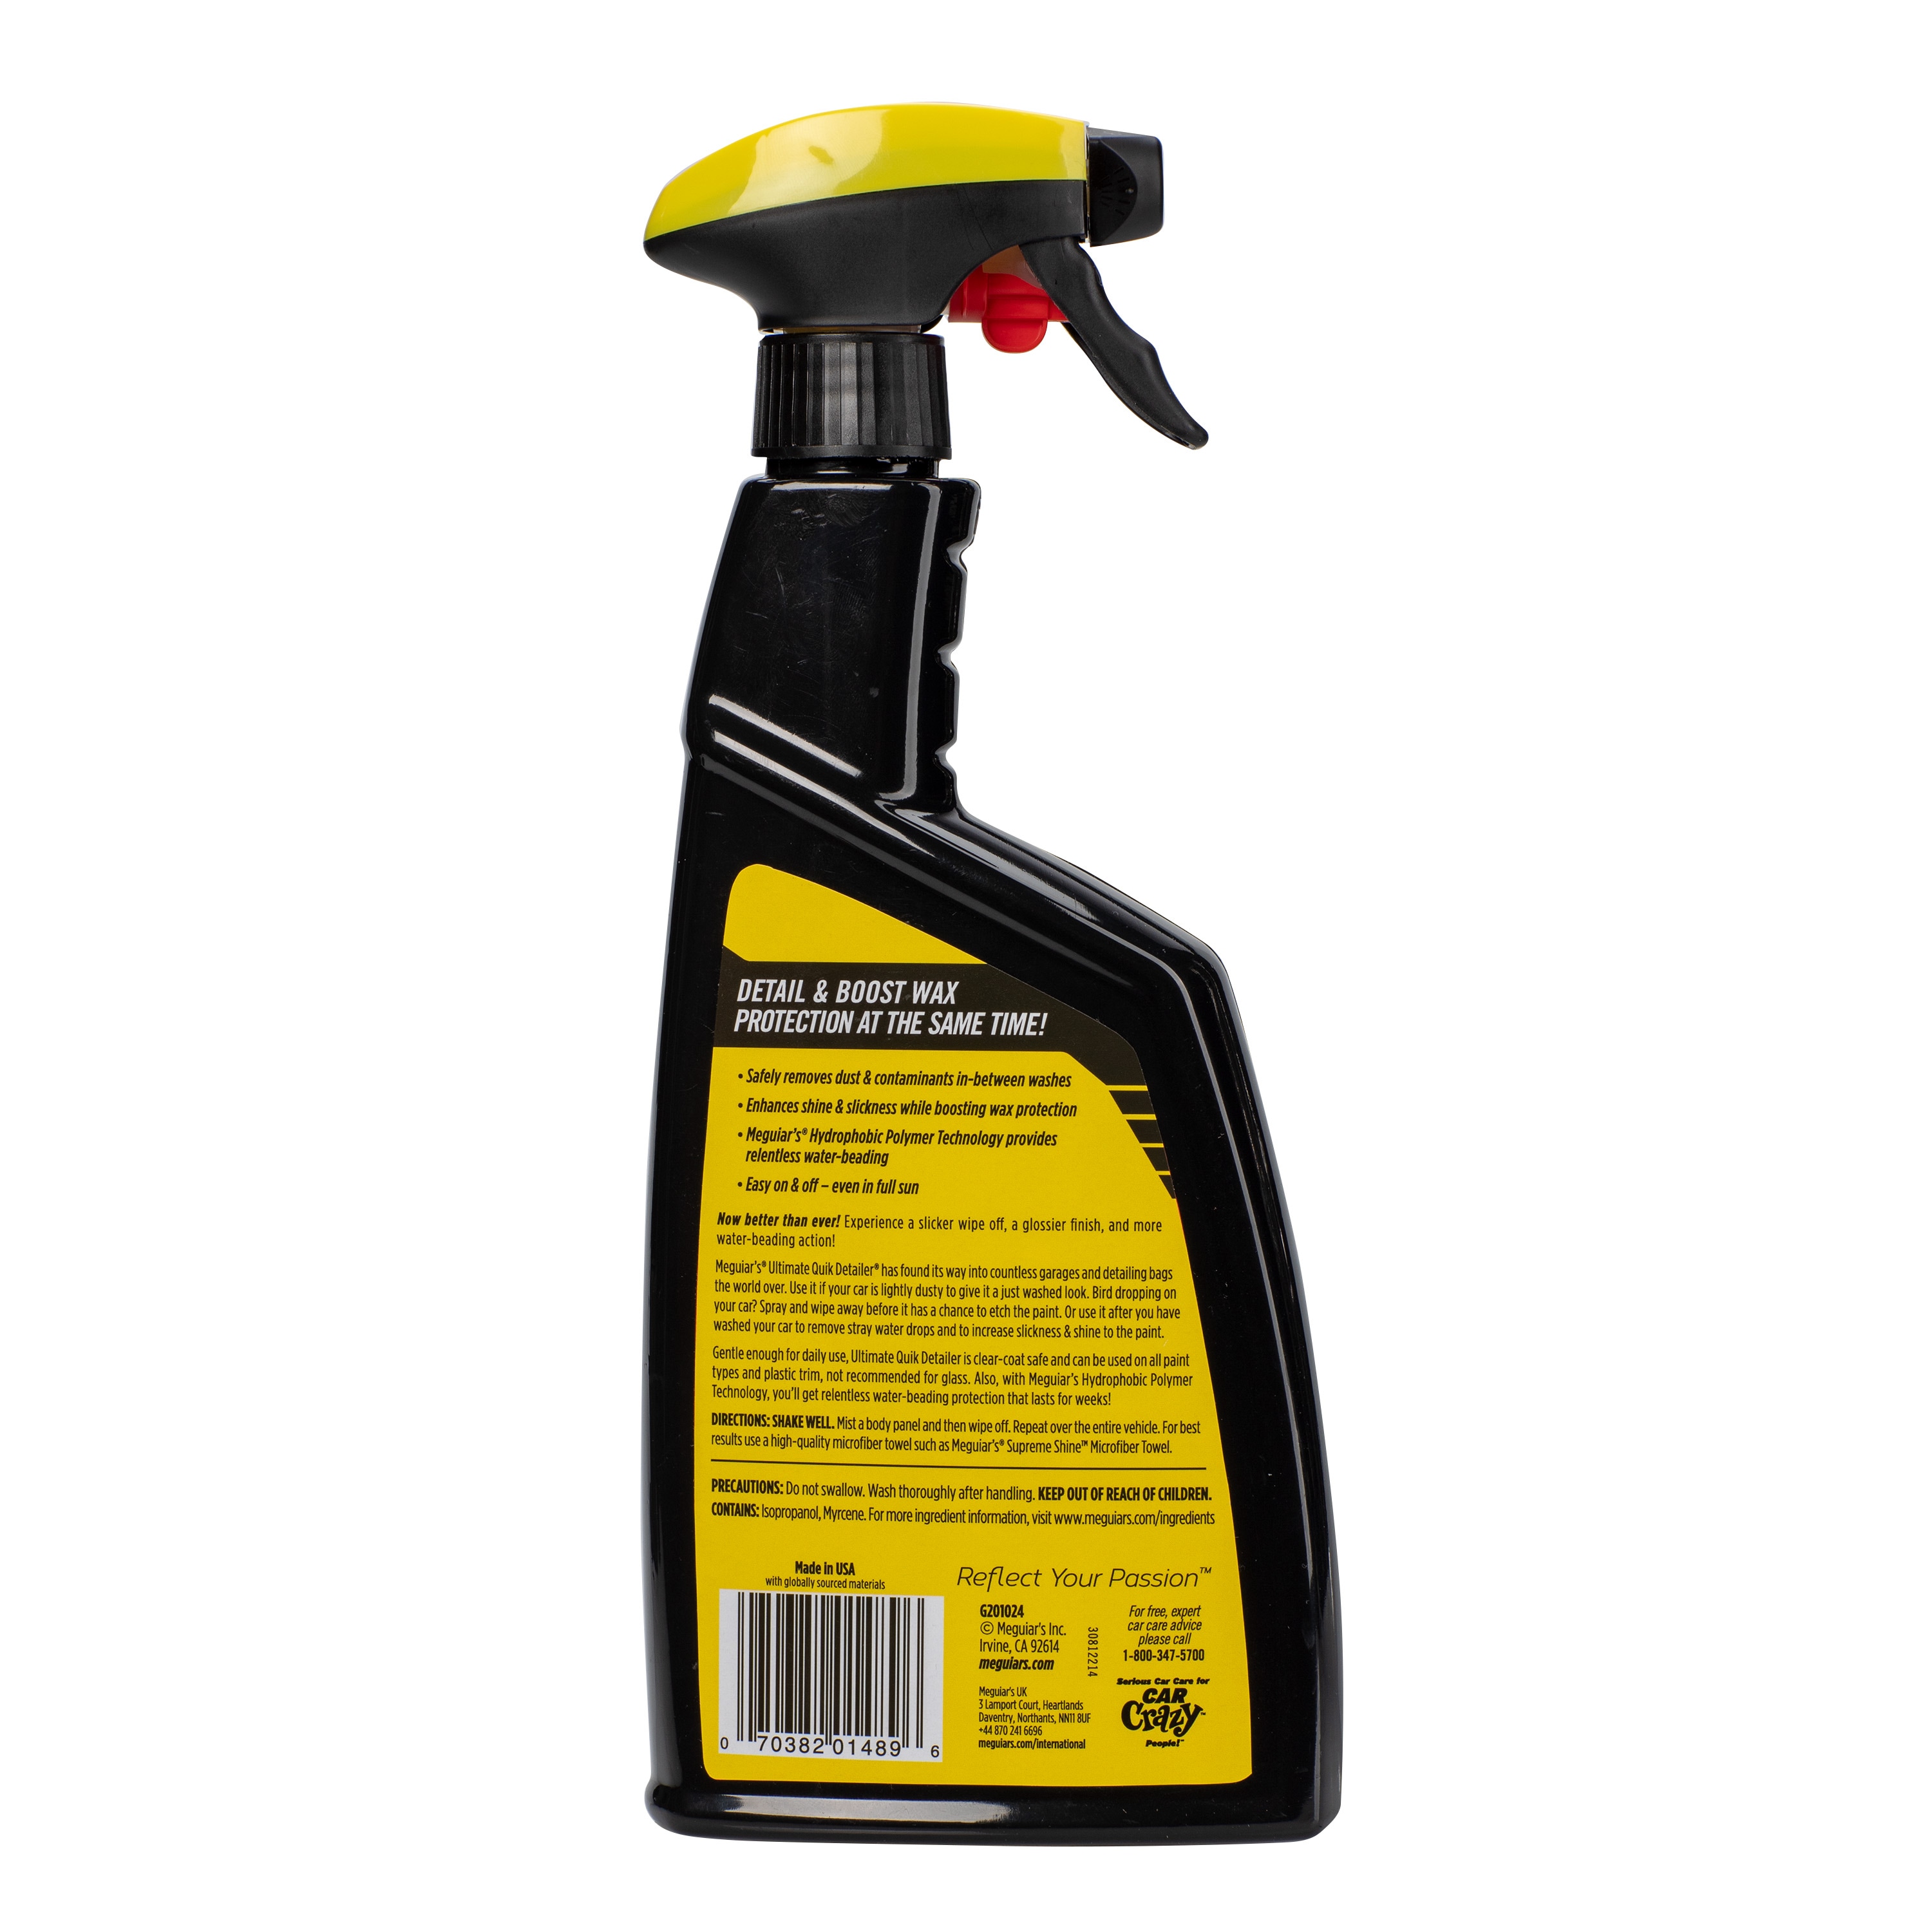 SLICK PRODUCTS 16 fl. oz. High Gloss Finish Detailer SP4005 - The Home Depot